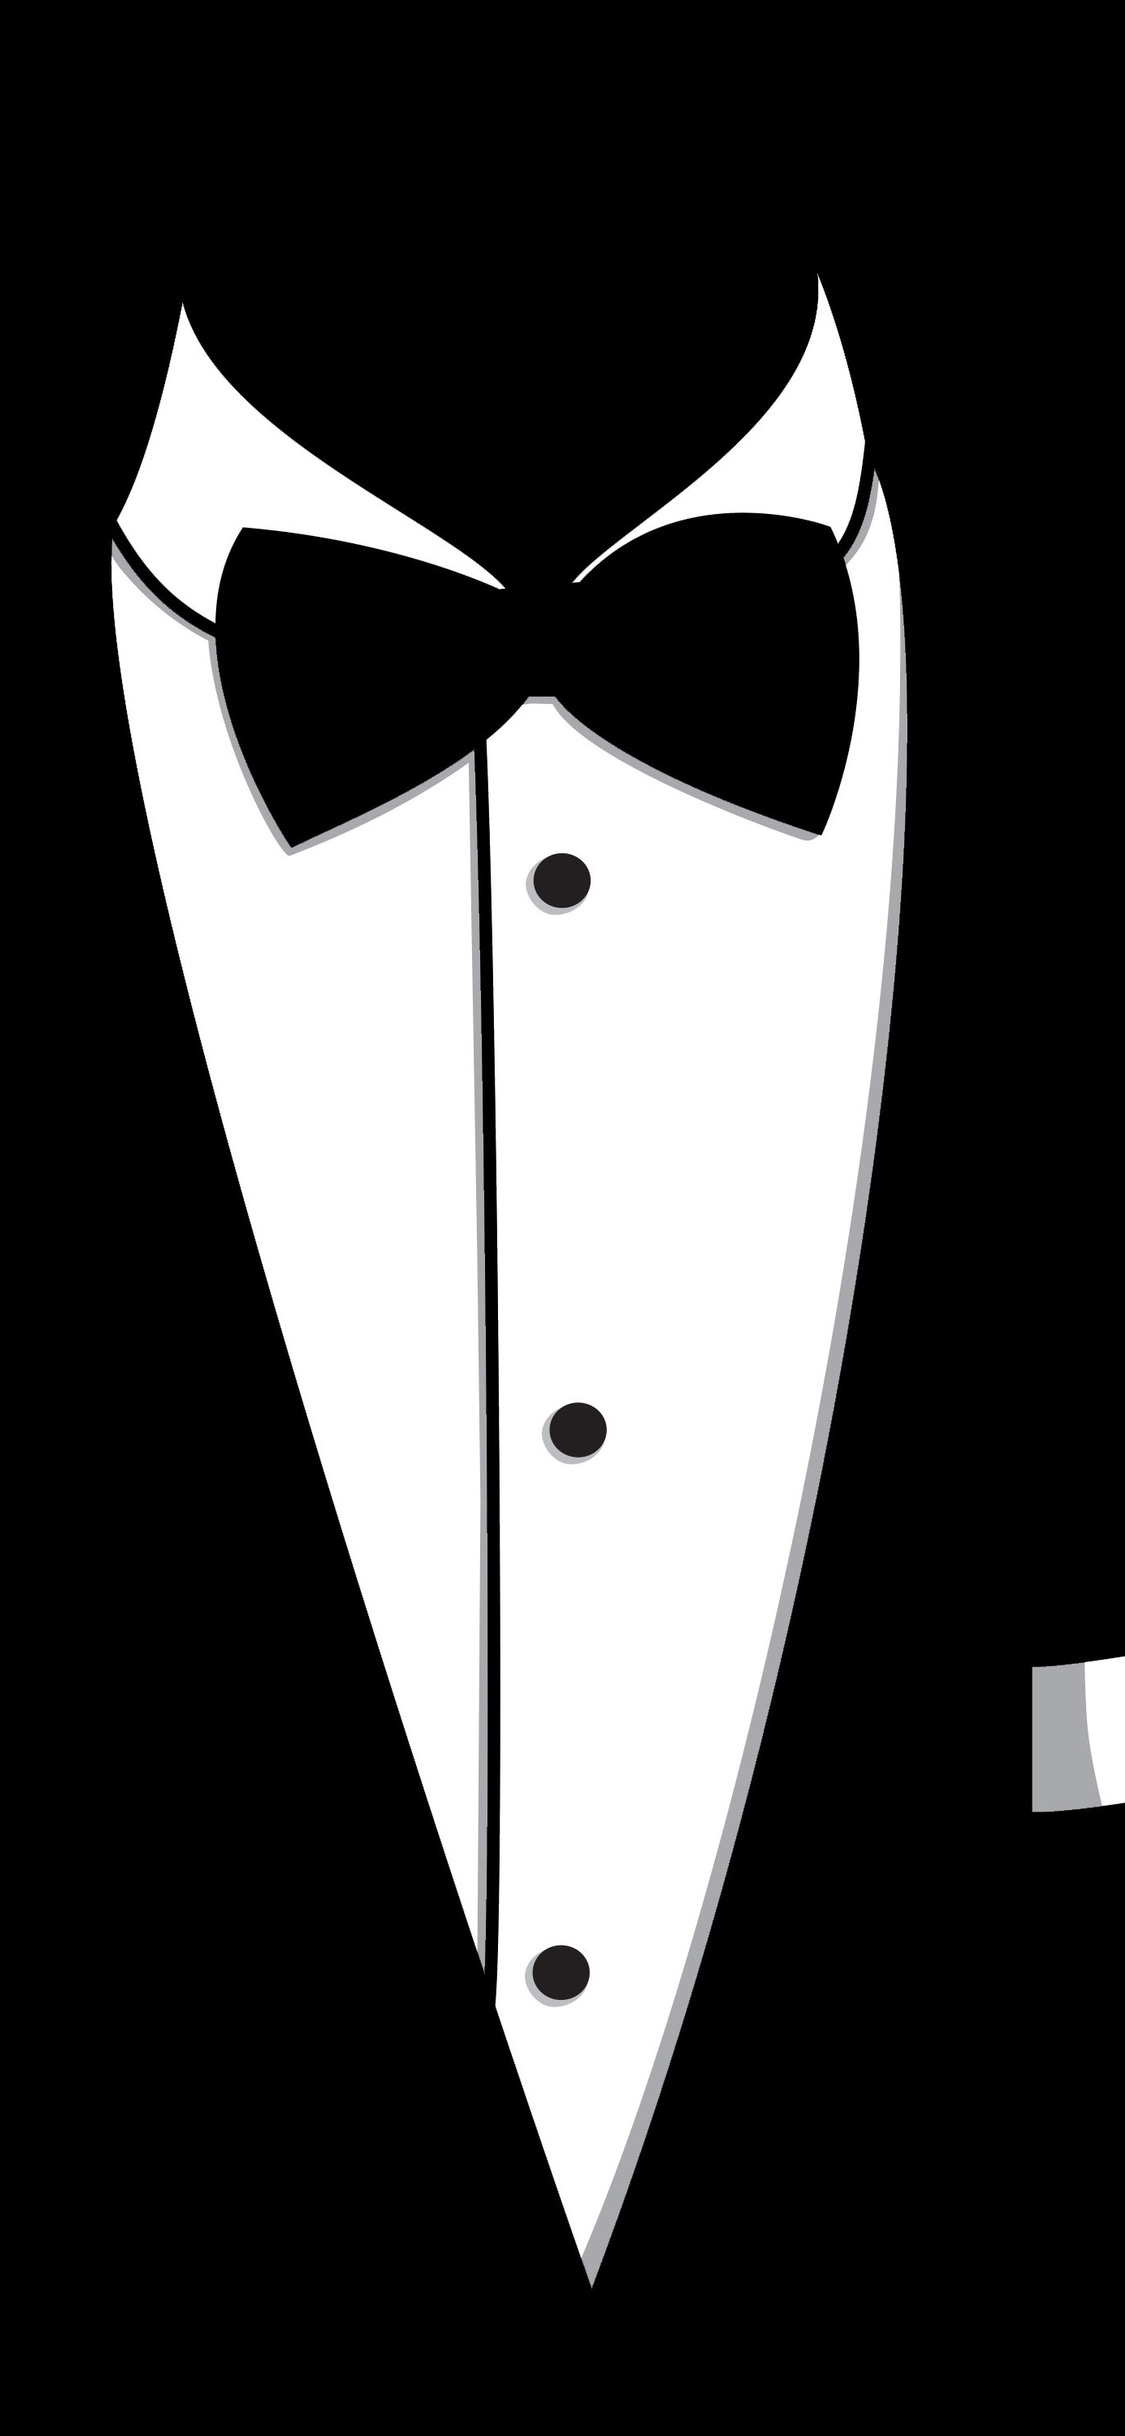 James Bond Wallpaper Iphone Allofpicts - James Bond Movie Collection Poster , HD Wallpaper & Backgrounds